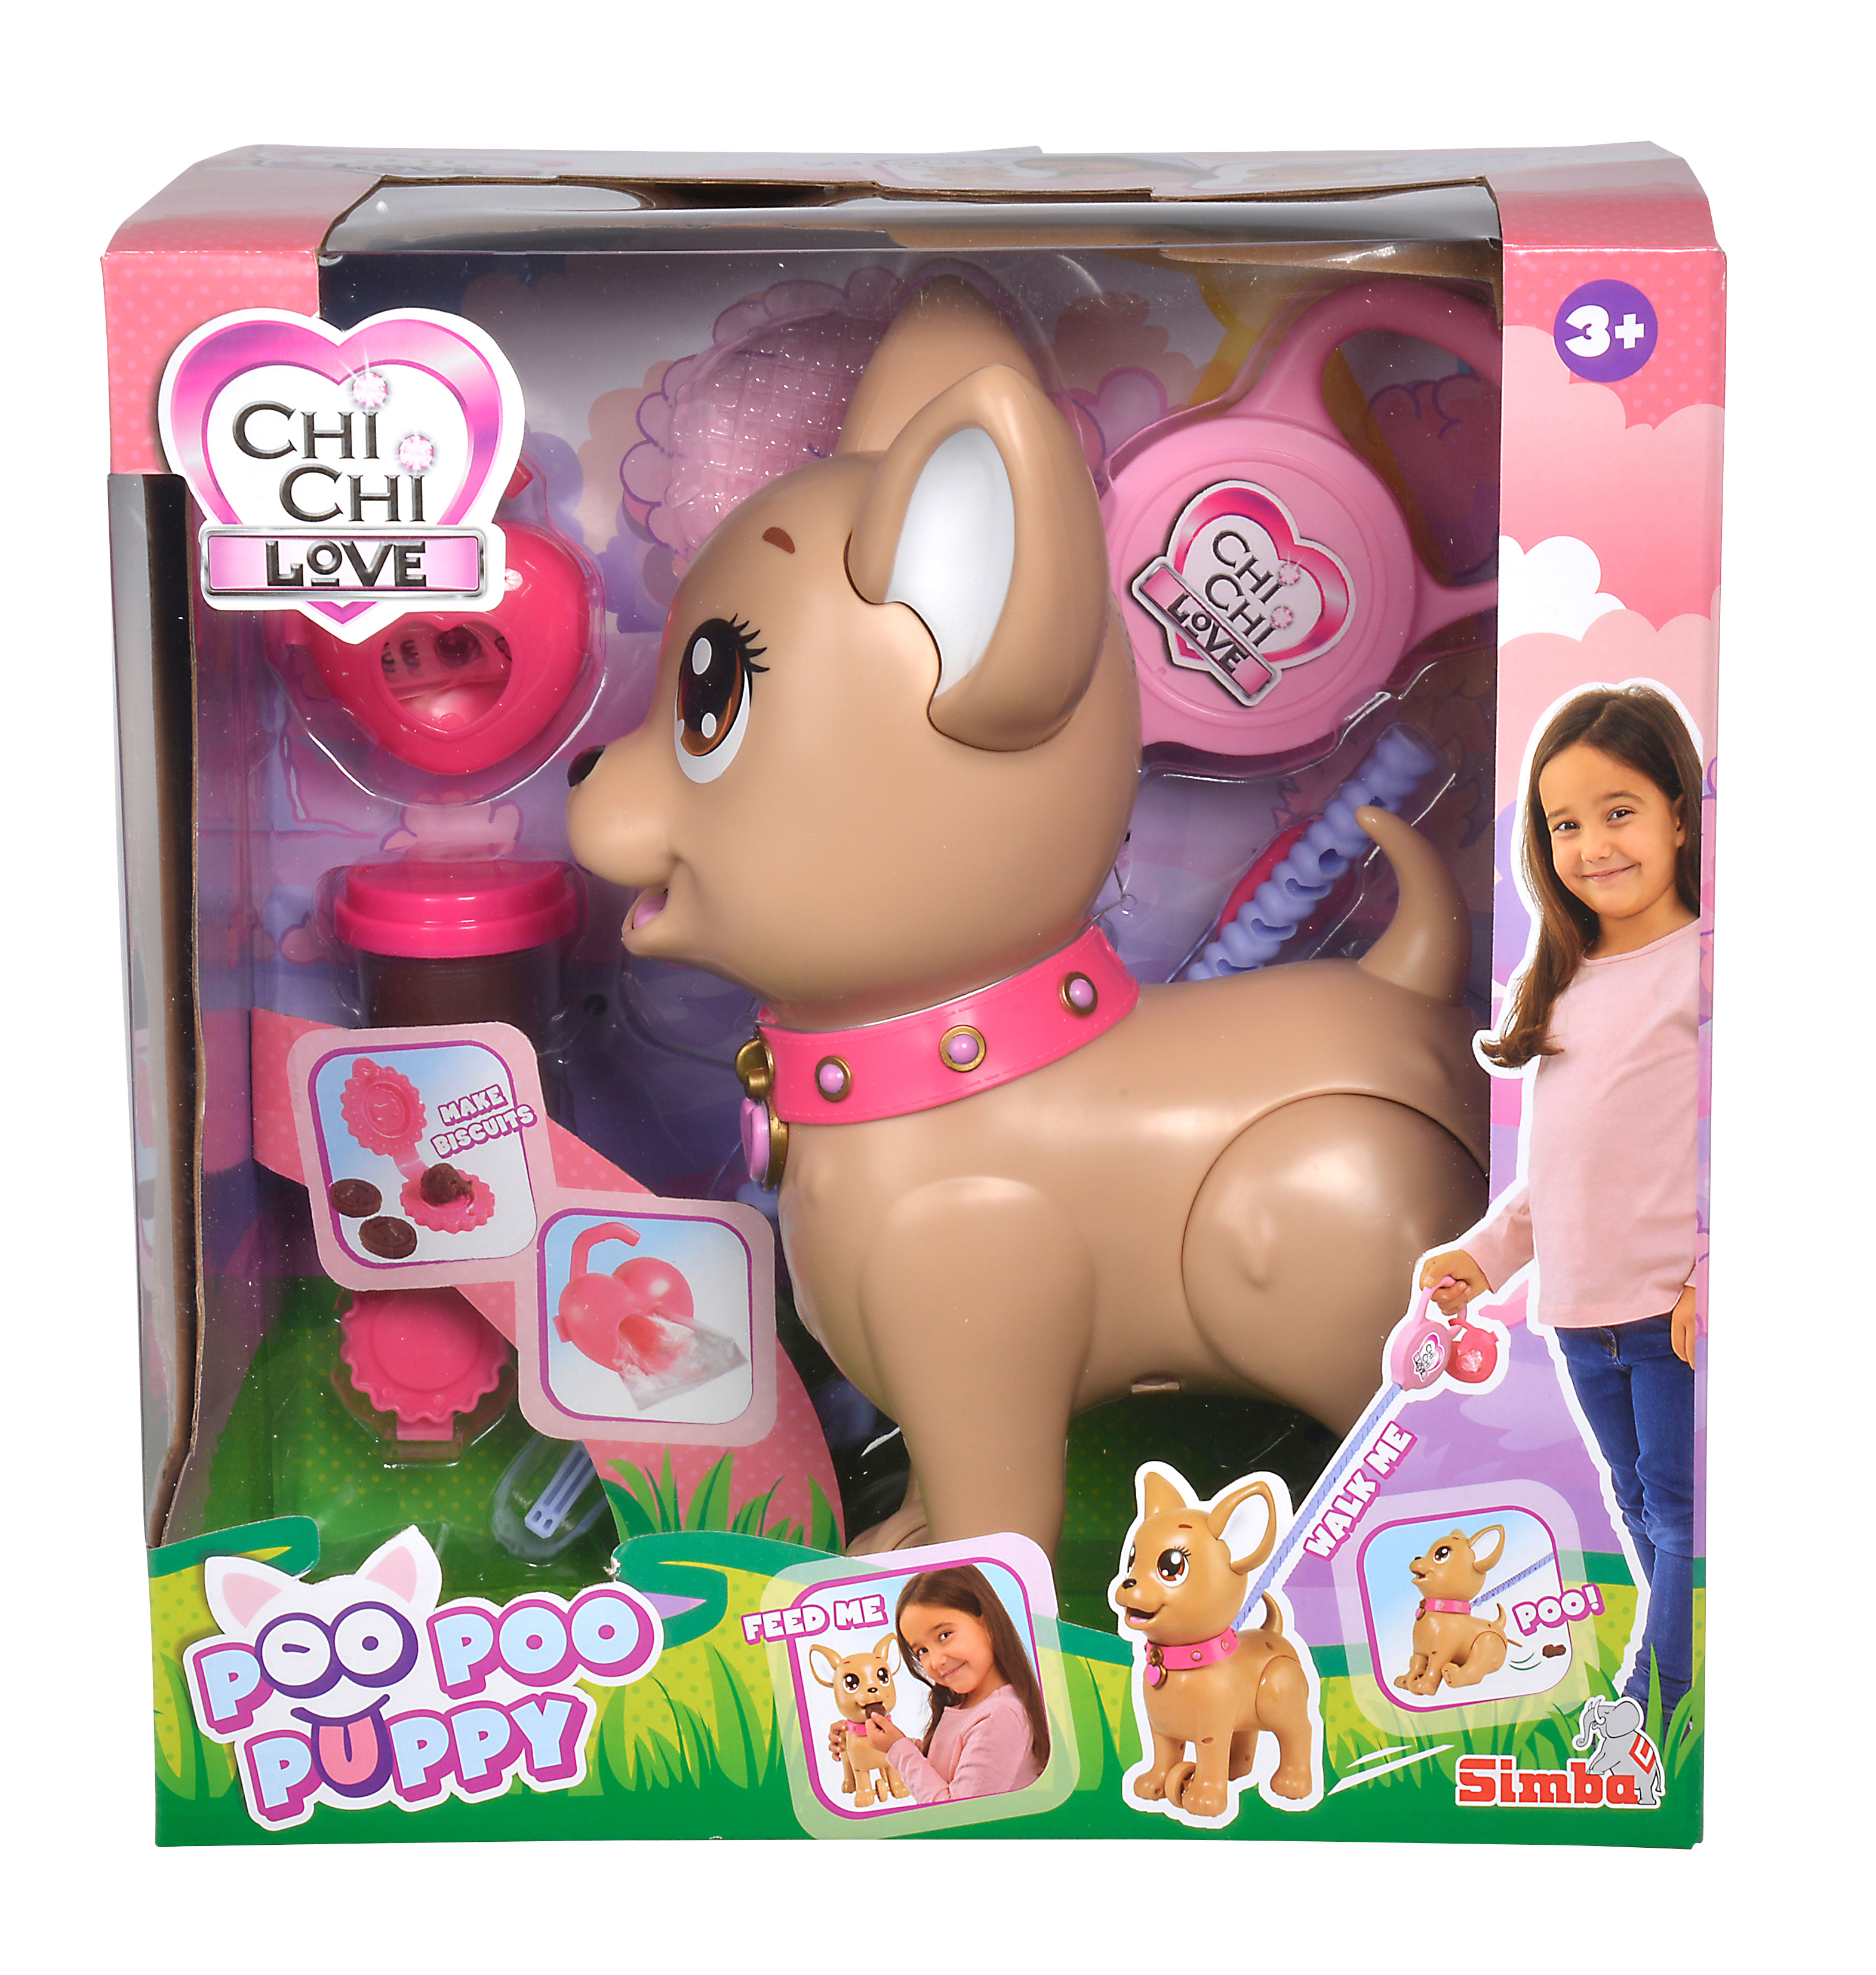 TOYS Chi Poo Puppy Funktionsspielzeug SIMBA Mehrfarbig Poo Chi Love